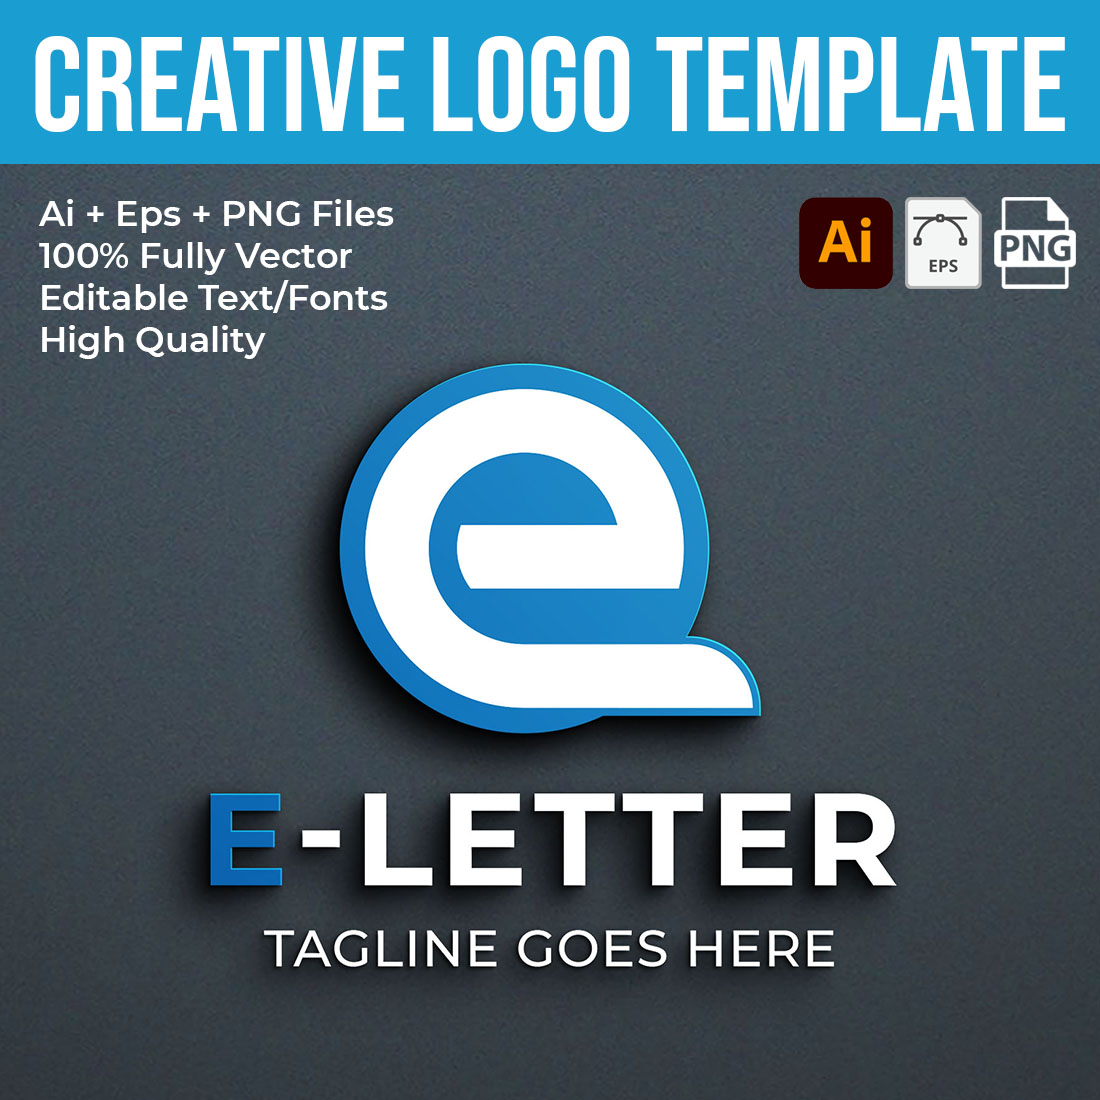 Creative and Professional Logo Design cover image.